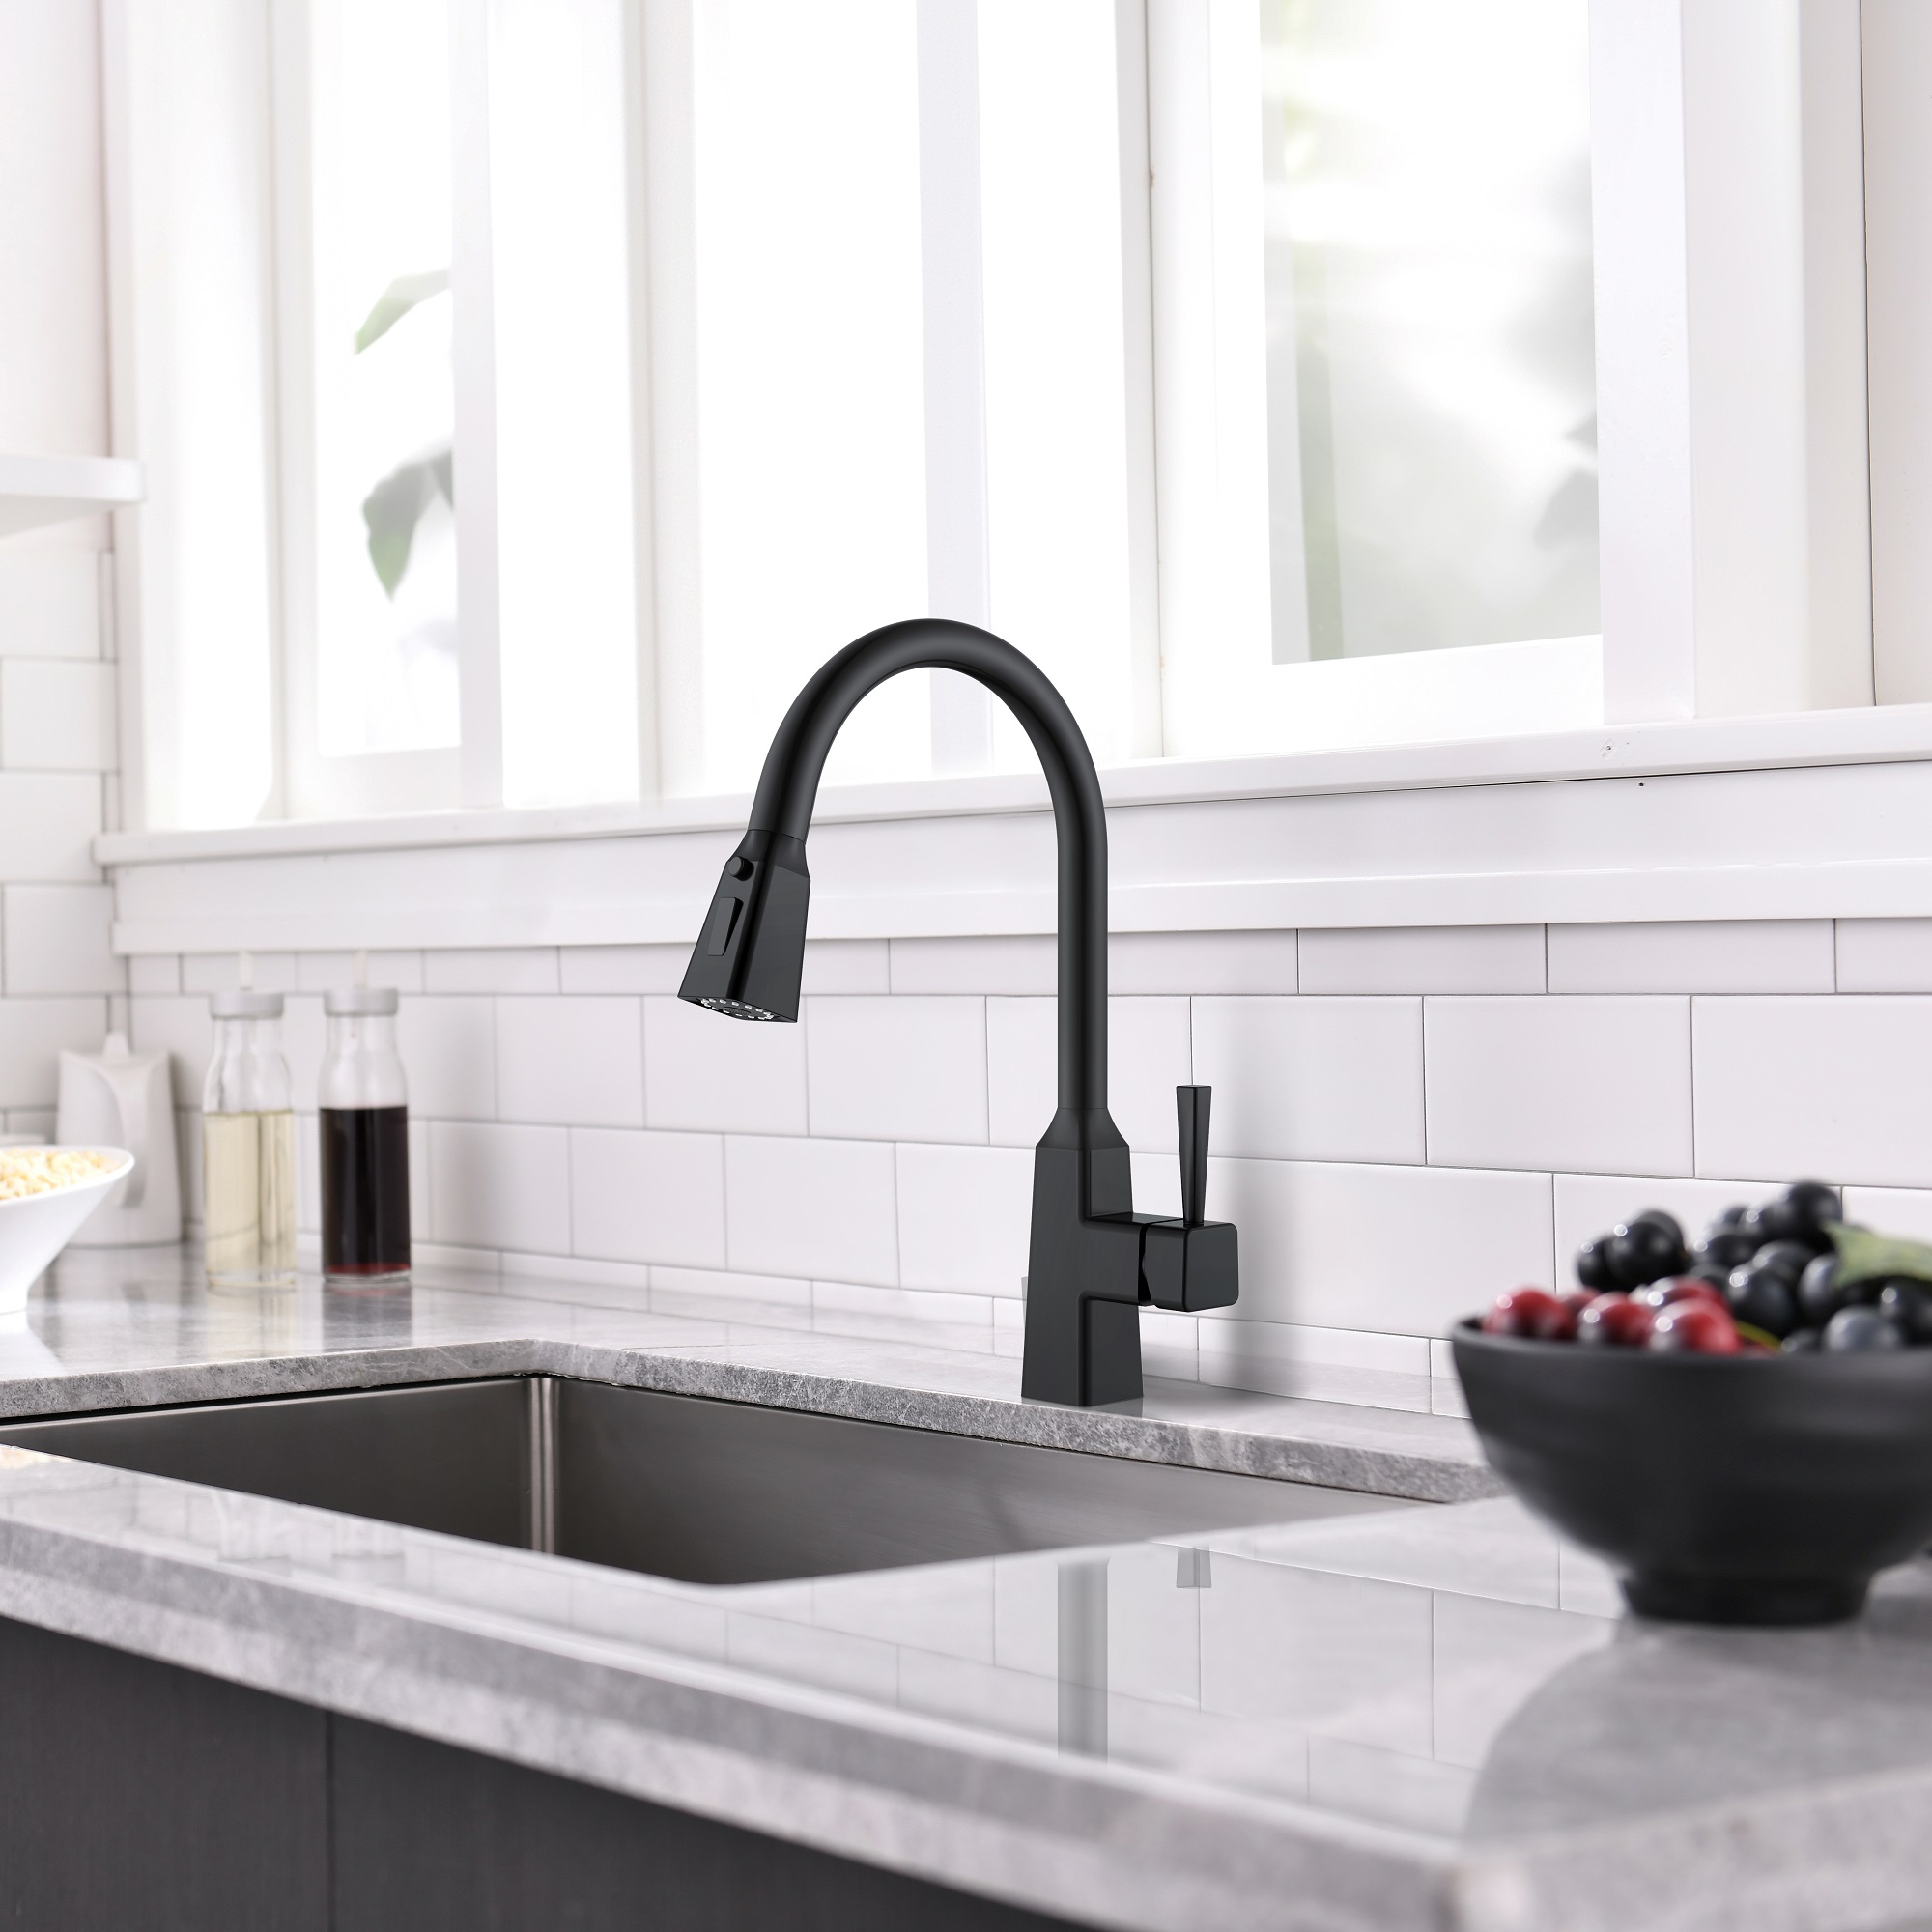 New Square Black Stainless Kitchen Faucet Pull Down Touchless Kithchen Faucet